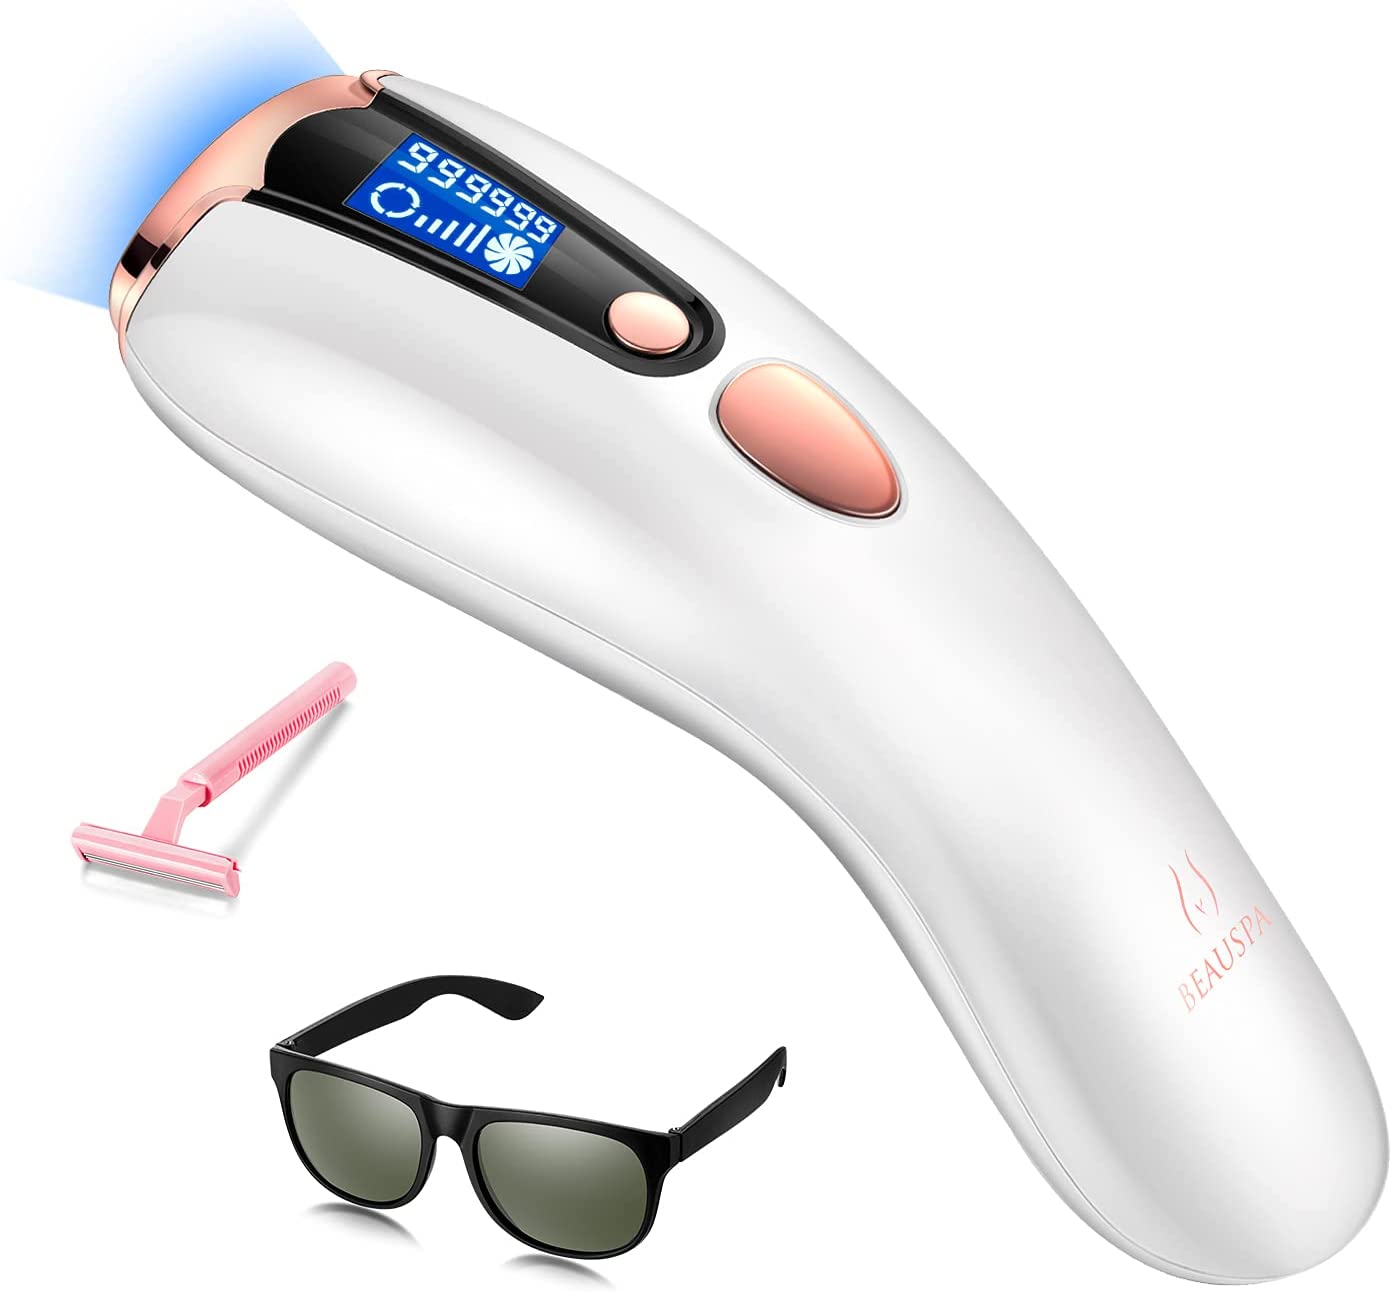 best facial cleaning devices to buy - BEAUSPA Laser Hair Removal Device